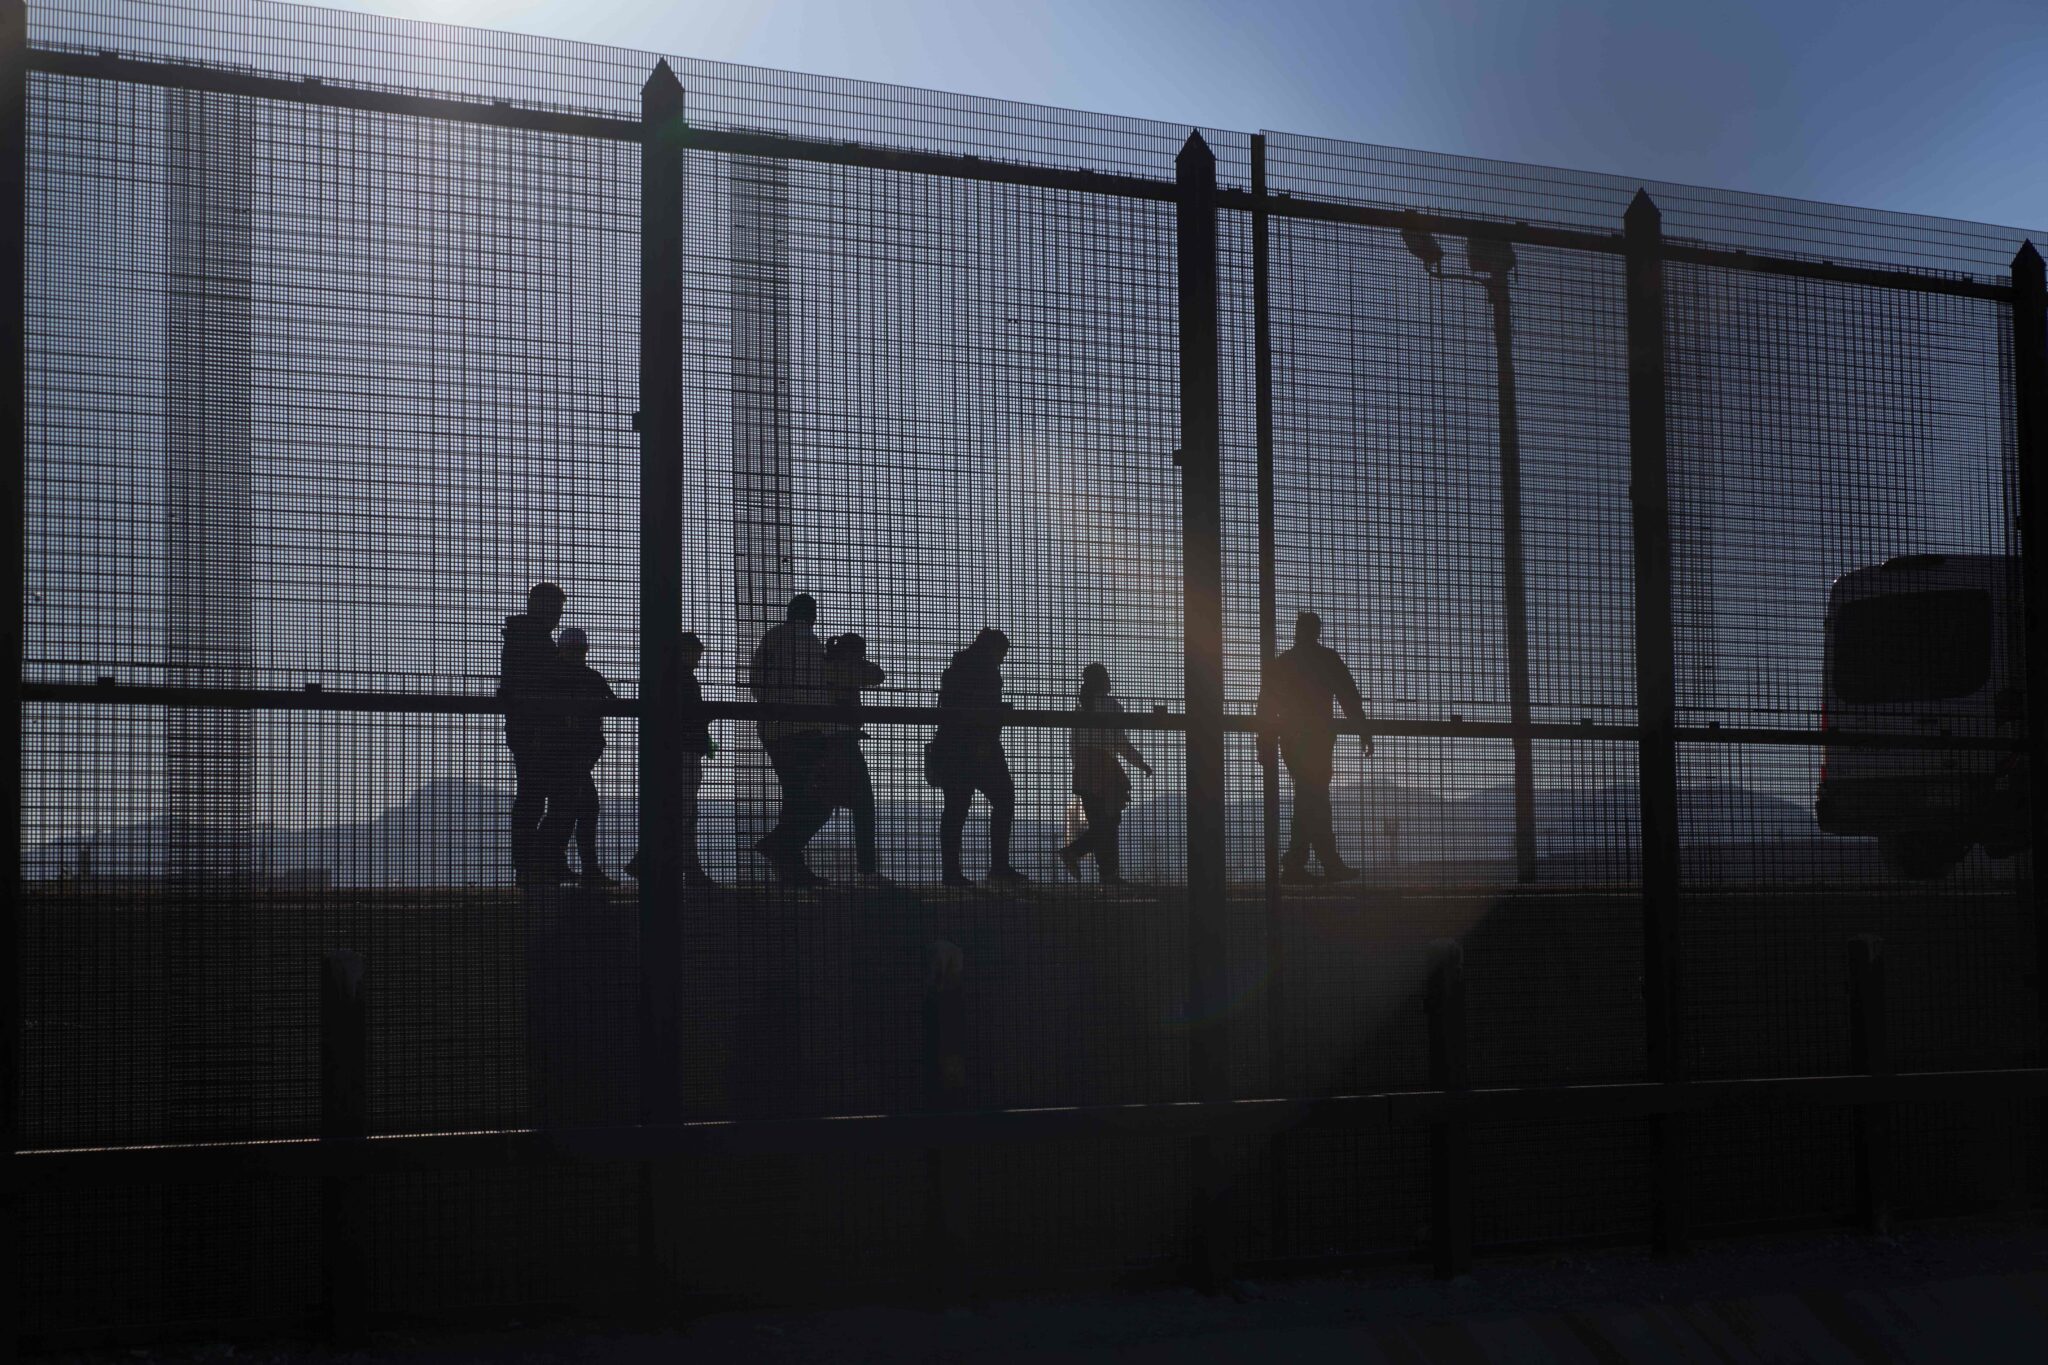 A US Border Patrol agent (L) leads migrants who crossed into the US from Mexico to a van for transportation in El Paso, Texas, on December 21, 2022. - The US Supreme Court halted December 19, 2022 the imminent scrapping of a key policy used since Donald Trump's administration to block migrants at the southwest border, amid worries over a surge in undocumented immigrants. An order signed by Chief Justice John Roberts placed an emergency stay on the removal planned for December 21, 2022 of Title 42, which allowed the government to use Covid-19 safety protocols to summarily block the entry of millions of migrants. (Photo by Allison Dinner / AFP) (Photo by ALLISON DINNER/AFP via Getty Images)